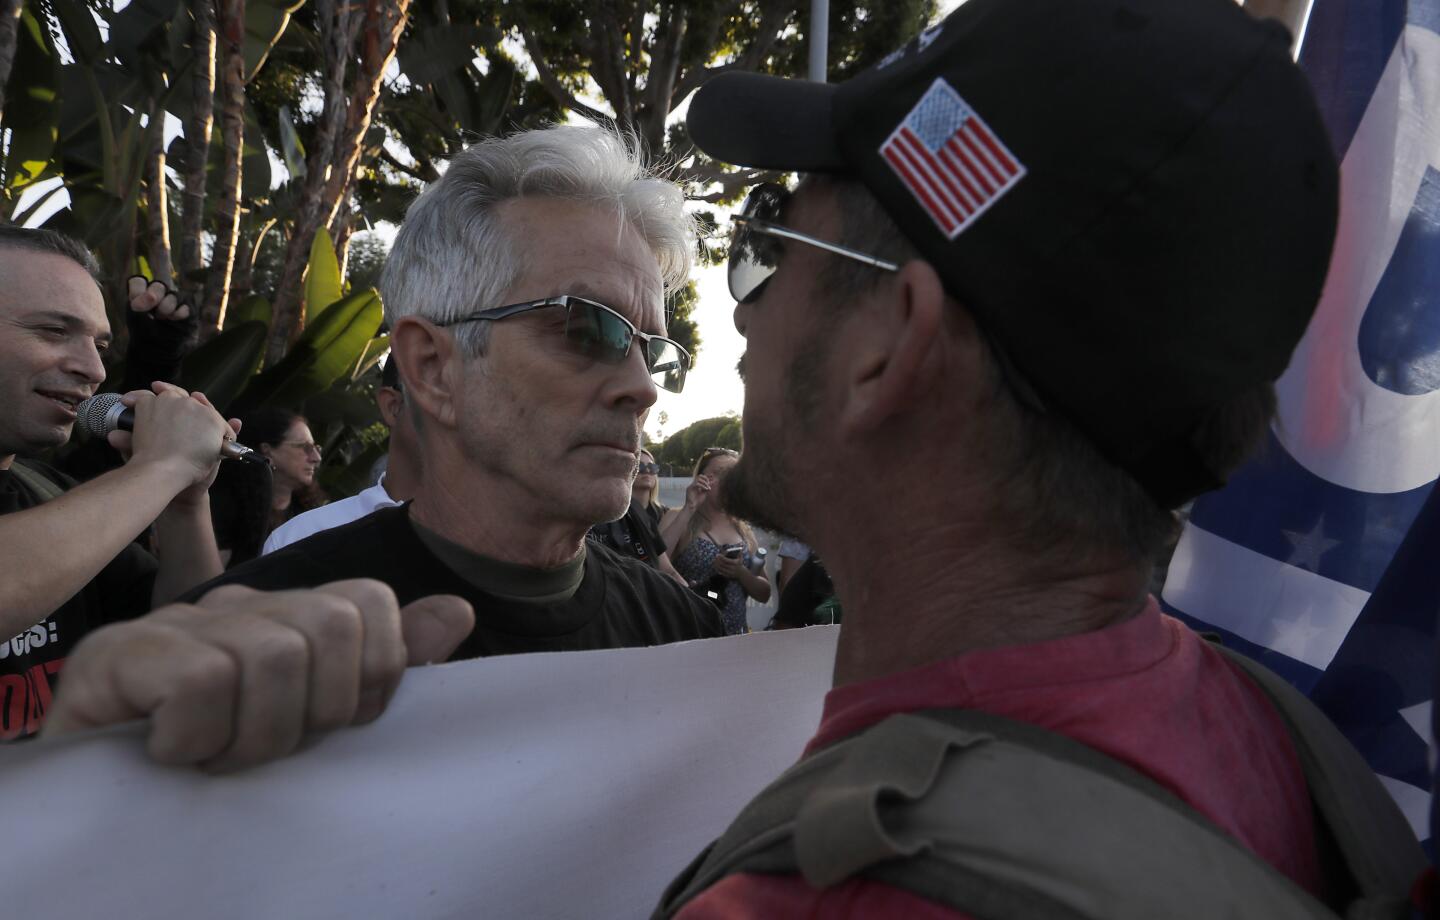 A supporter of President Trump, right, goes face to face with anti-Trump protesters in Beverly Hills.